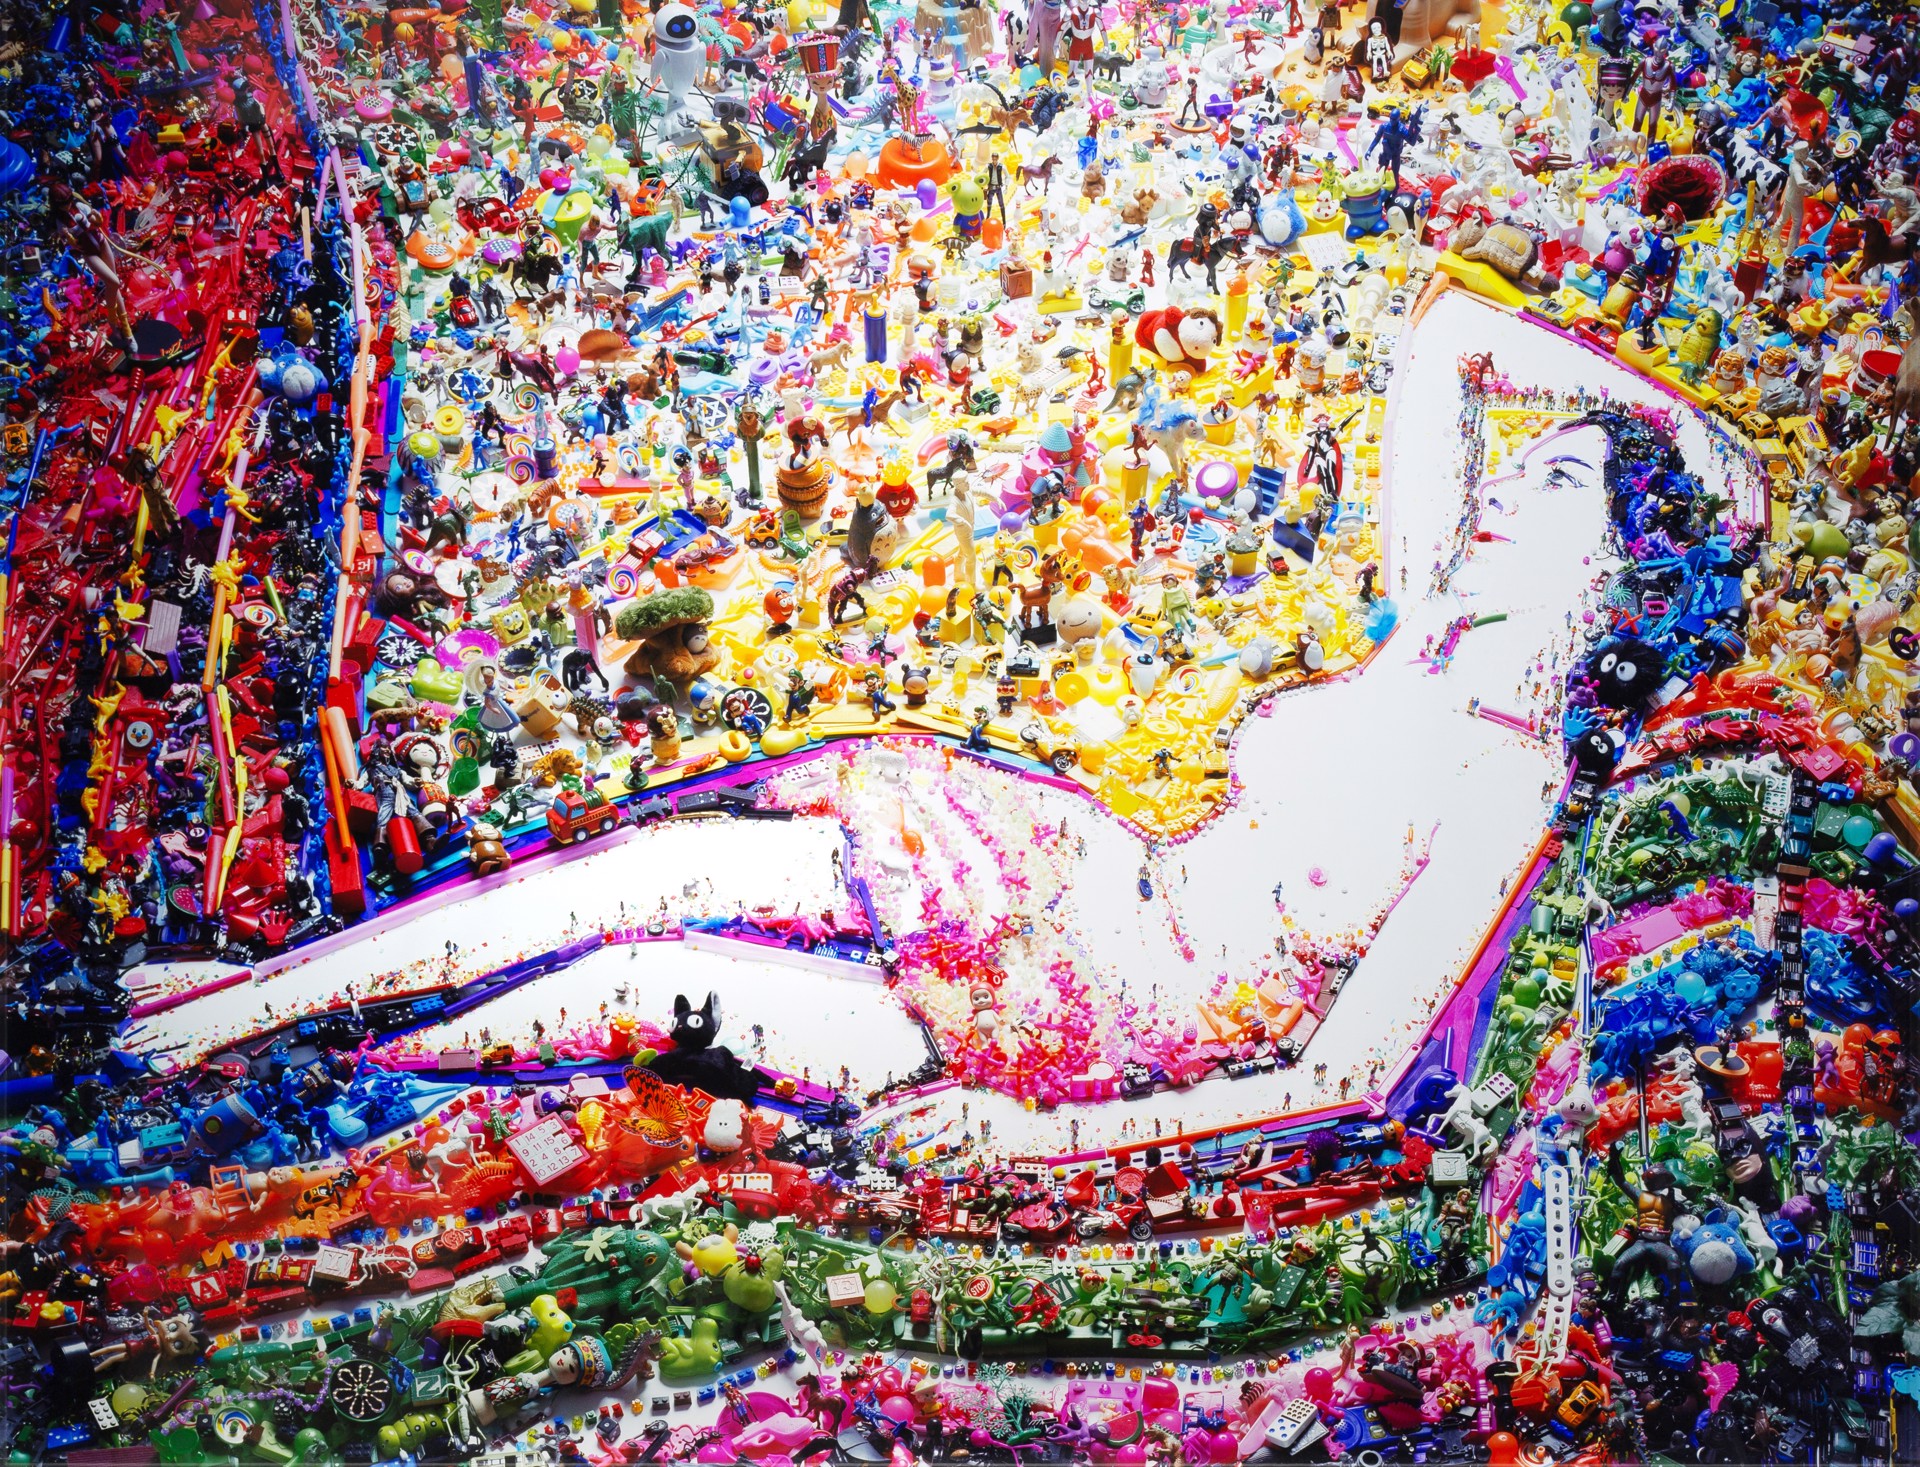 Odalisque, after Gustave le Gray (from ‘Rebus') by Vik Muniz